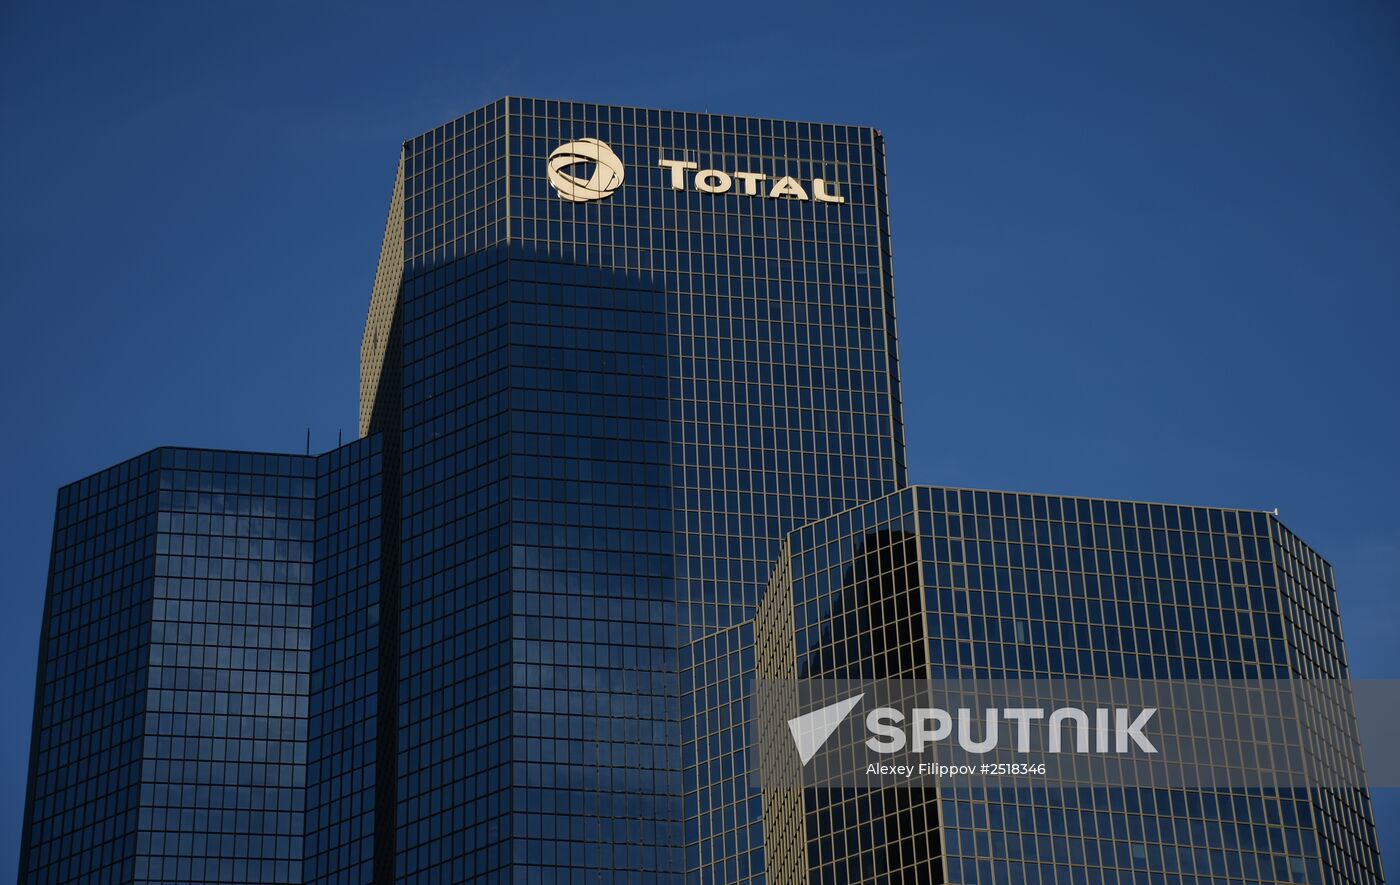 Main office of French energy company Total